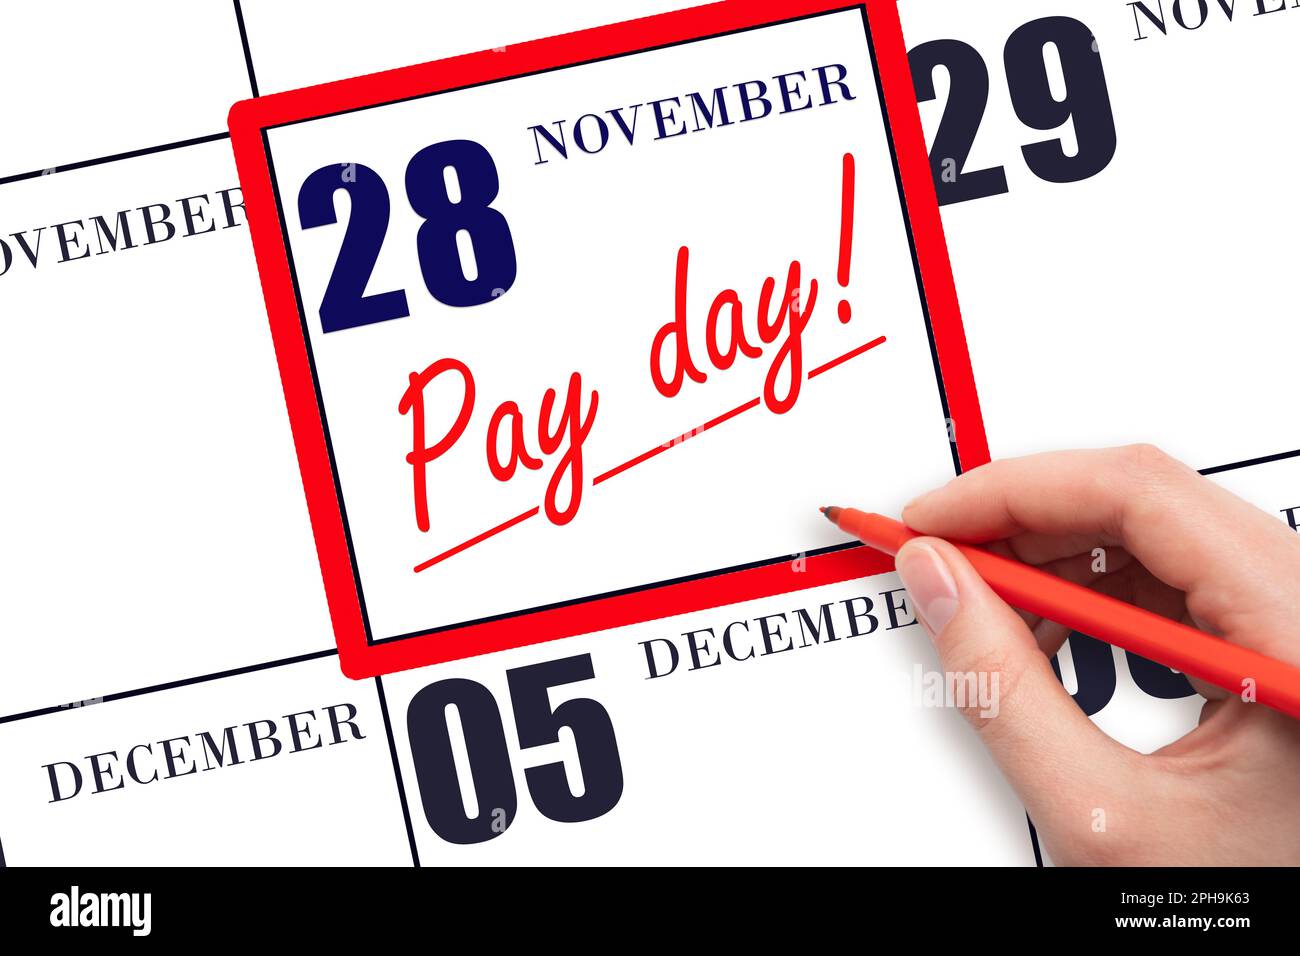 28th day of November. Hand writing text PAY DATE on calendar date November 28 and underline it. Payment due date.  Reminder concept of payment. Autumn Stock Photo